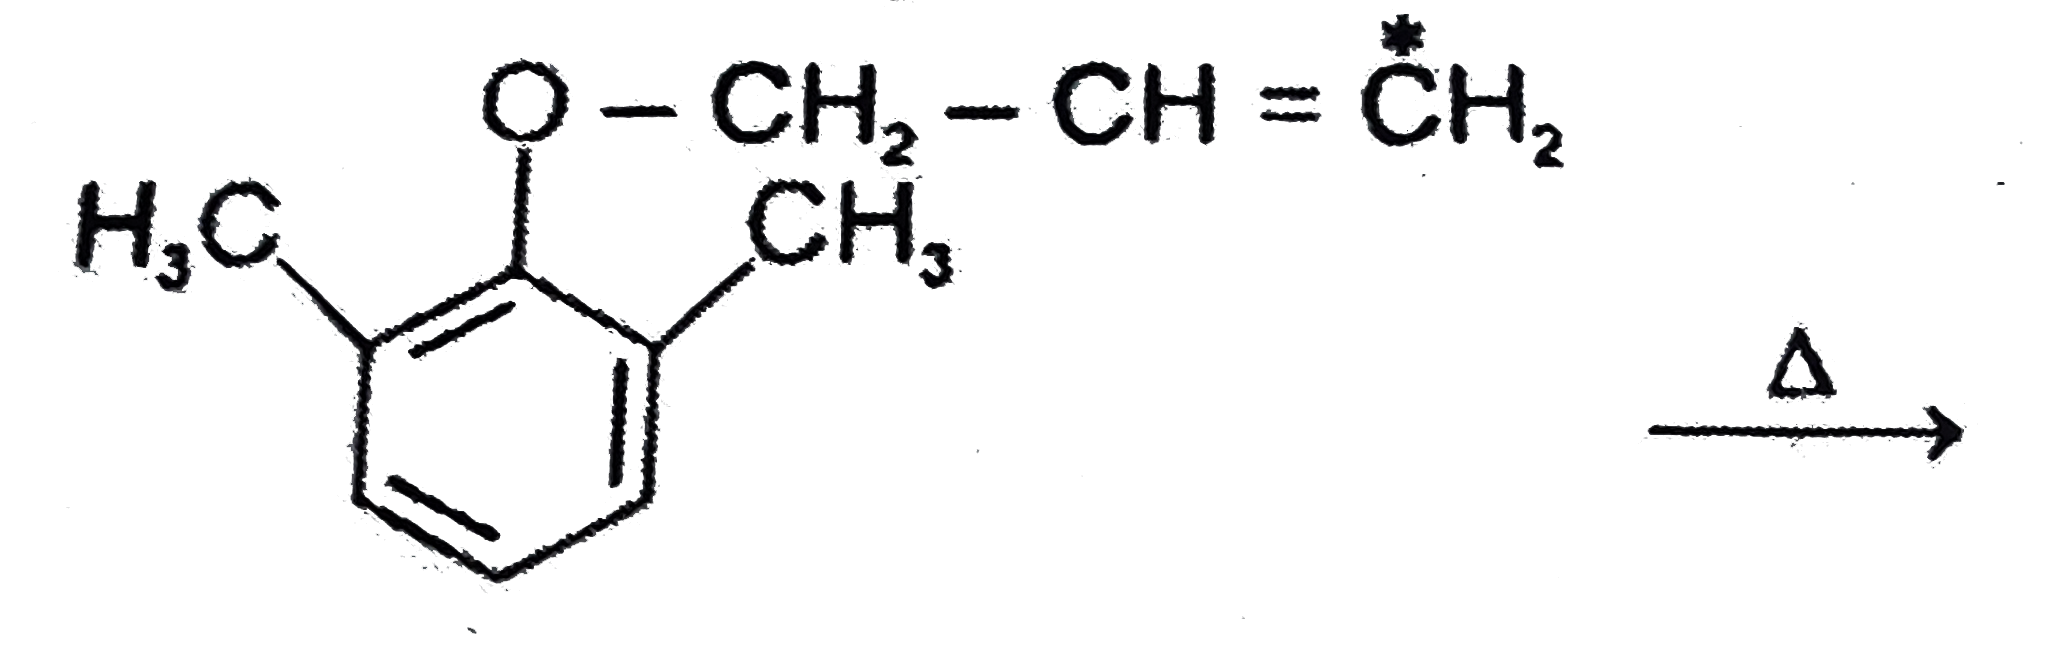 Give the product of the following reactions: